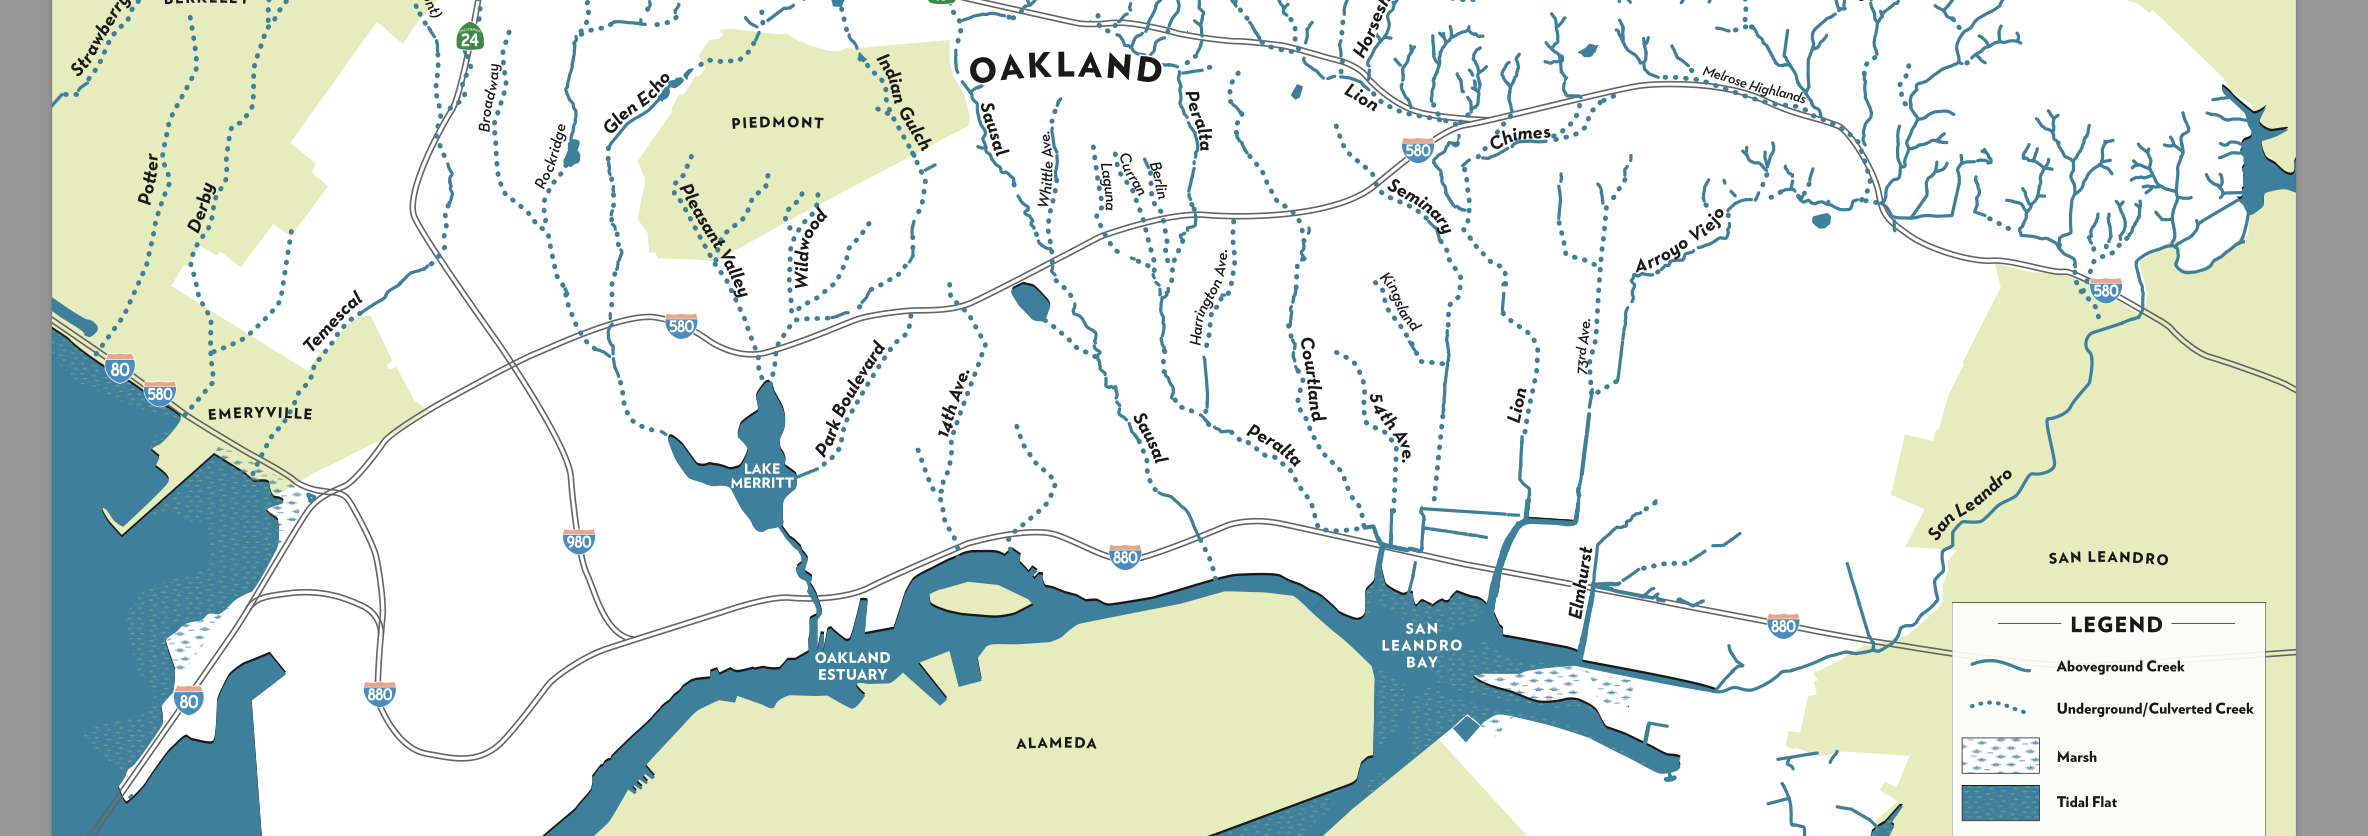 Oakland Watersheds